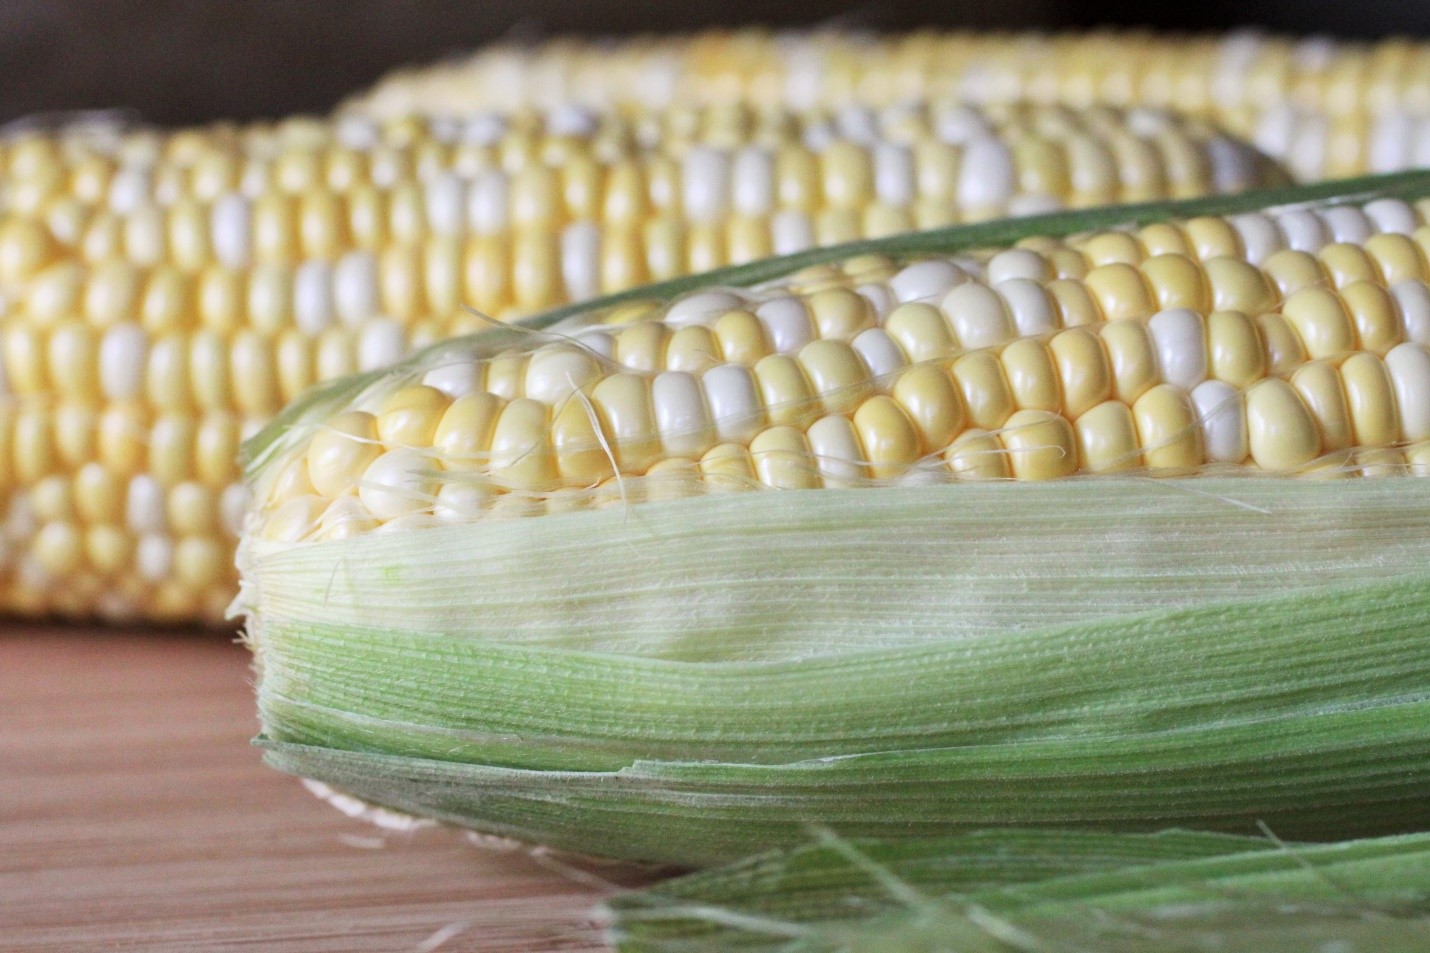 When buying Go for cobs with fresh looking green husks and moist stems. Kernels should be juicy when pierced. How to store Wrap unhusked ears with damp paper towel. Place in a plastic bag and refrigerate for two to three days. How to prepare Remove husks and silk. Rinse under water. To remove kernels, slice lengthwise along the cob. Nutrition Corn is a good source of folate. It also contains fibre, vitamin C and B vitamins (niacin and thiamine). 